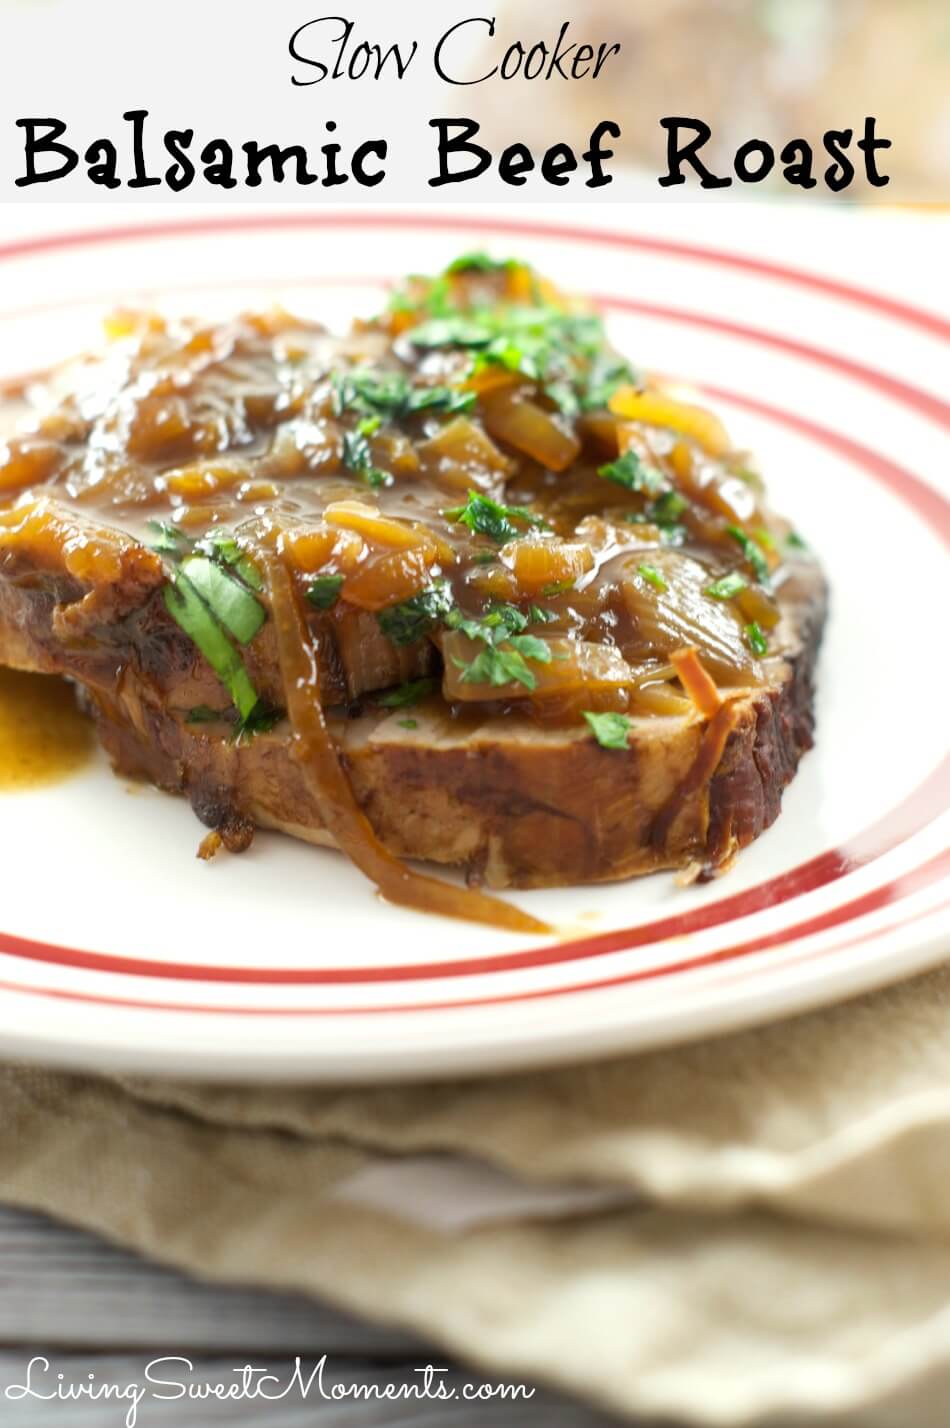 Slow Cooker Balsamic Beef Roast from Living Sweet Moments